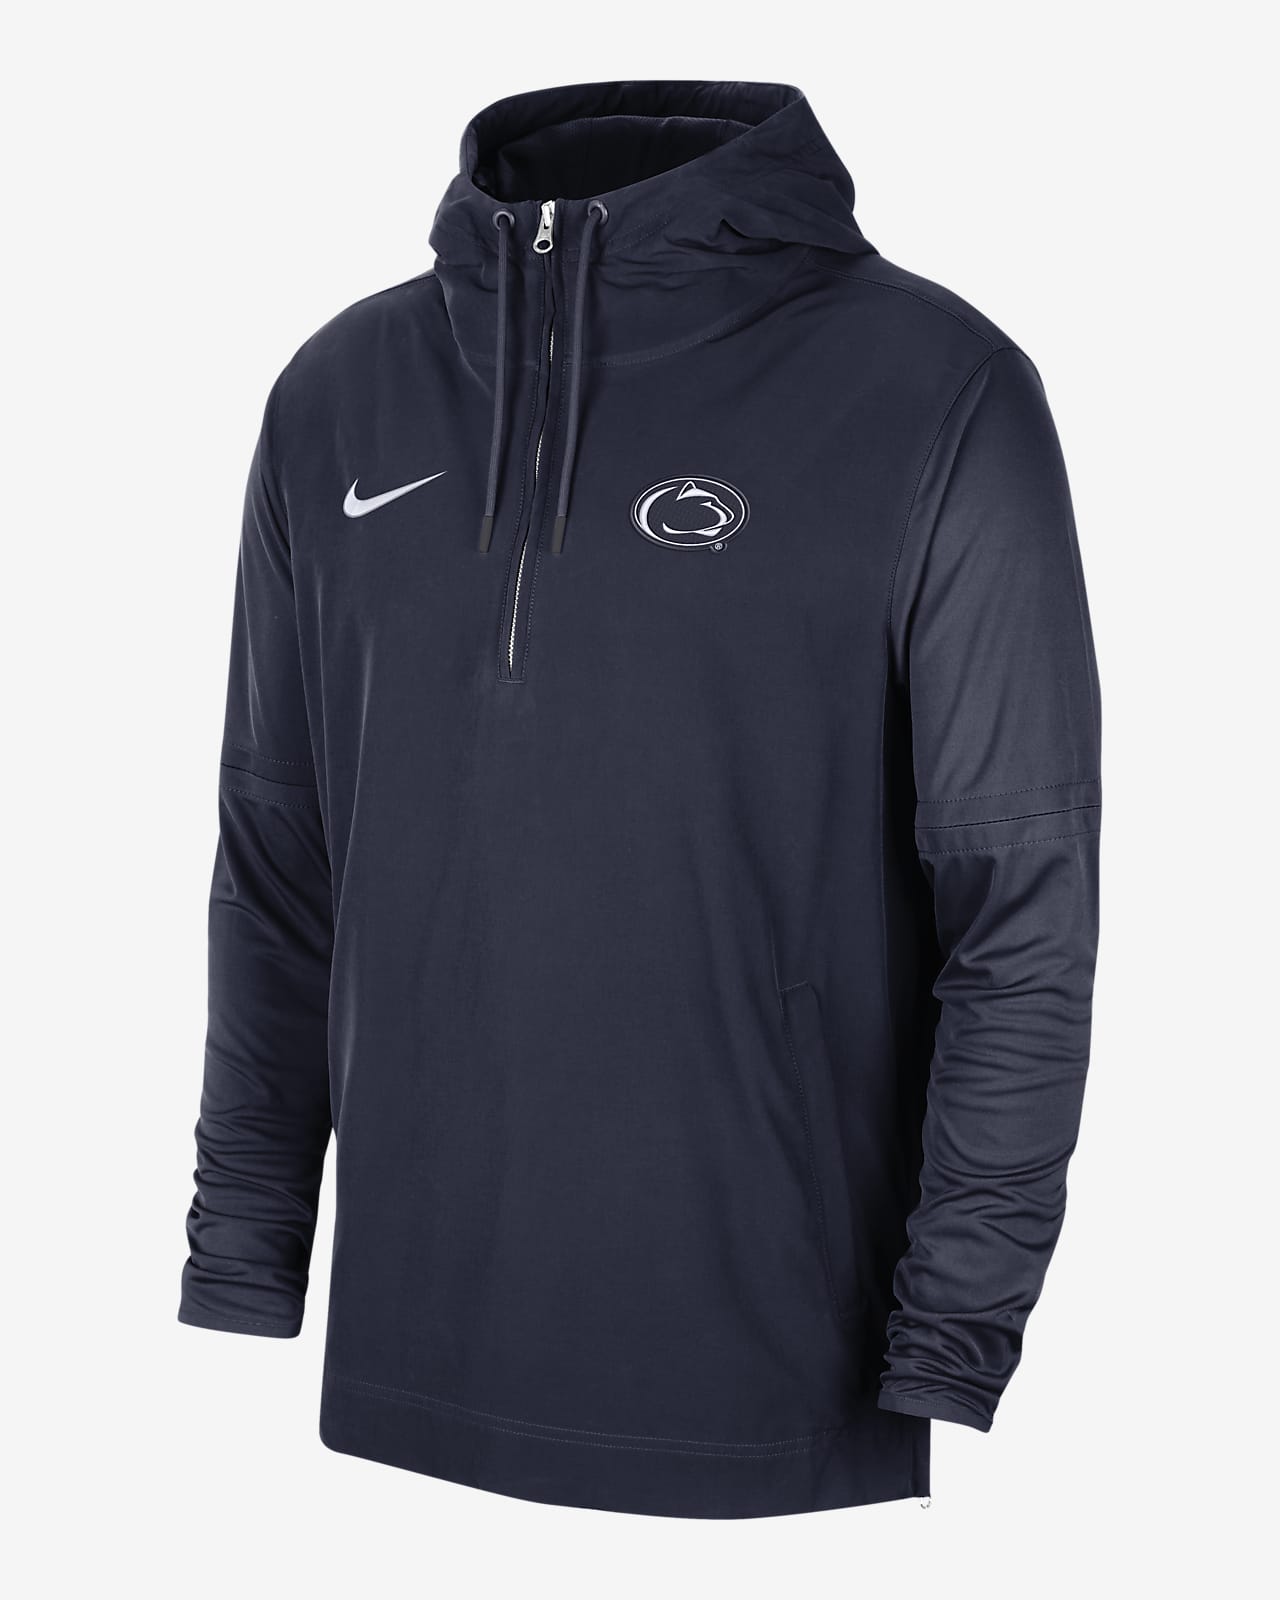 Penn State Player Men's Nike College Long-Sleeve Woven Jacket